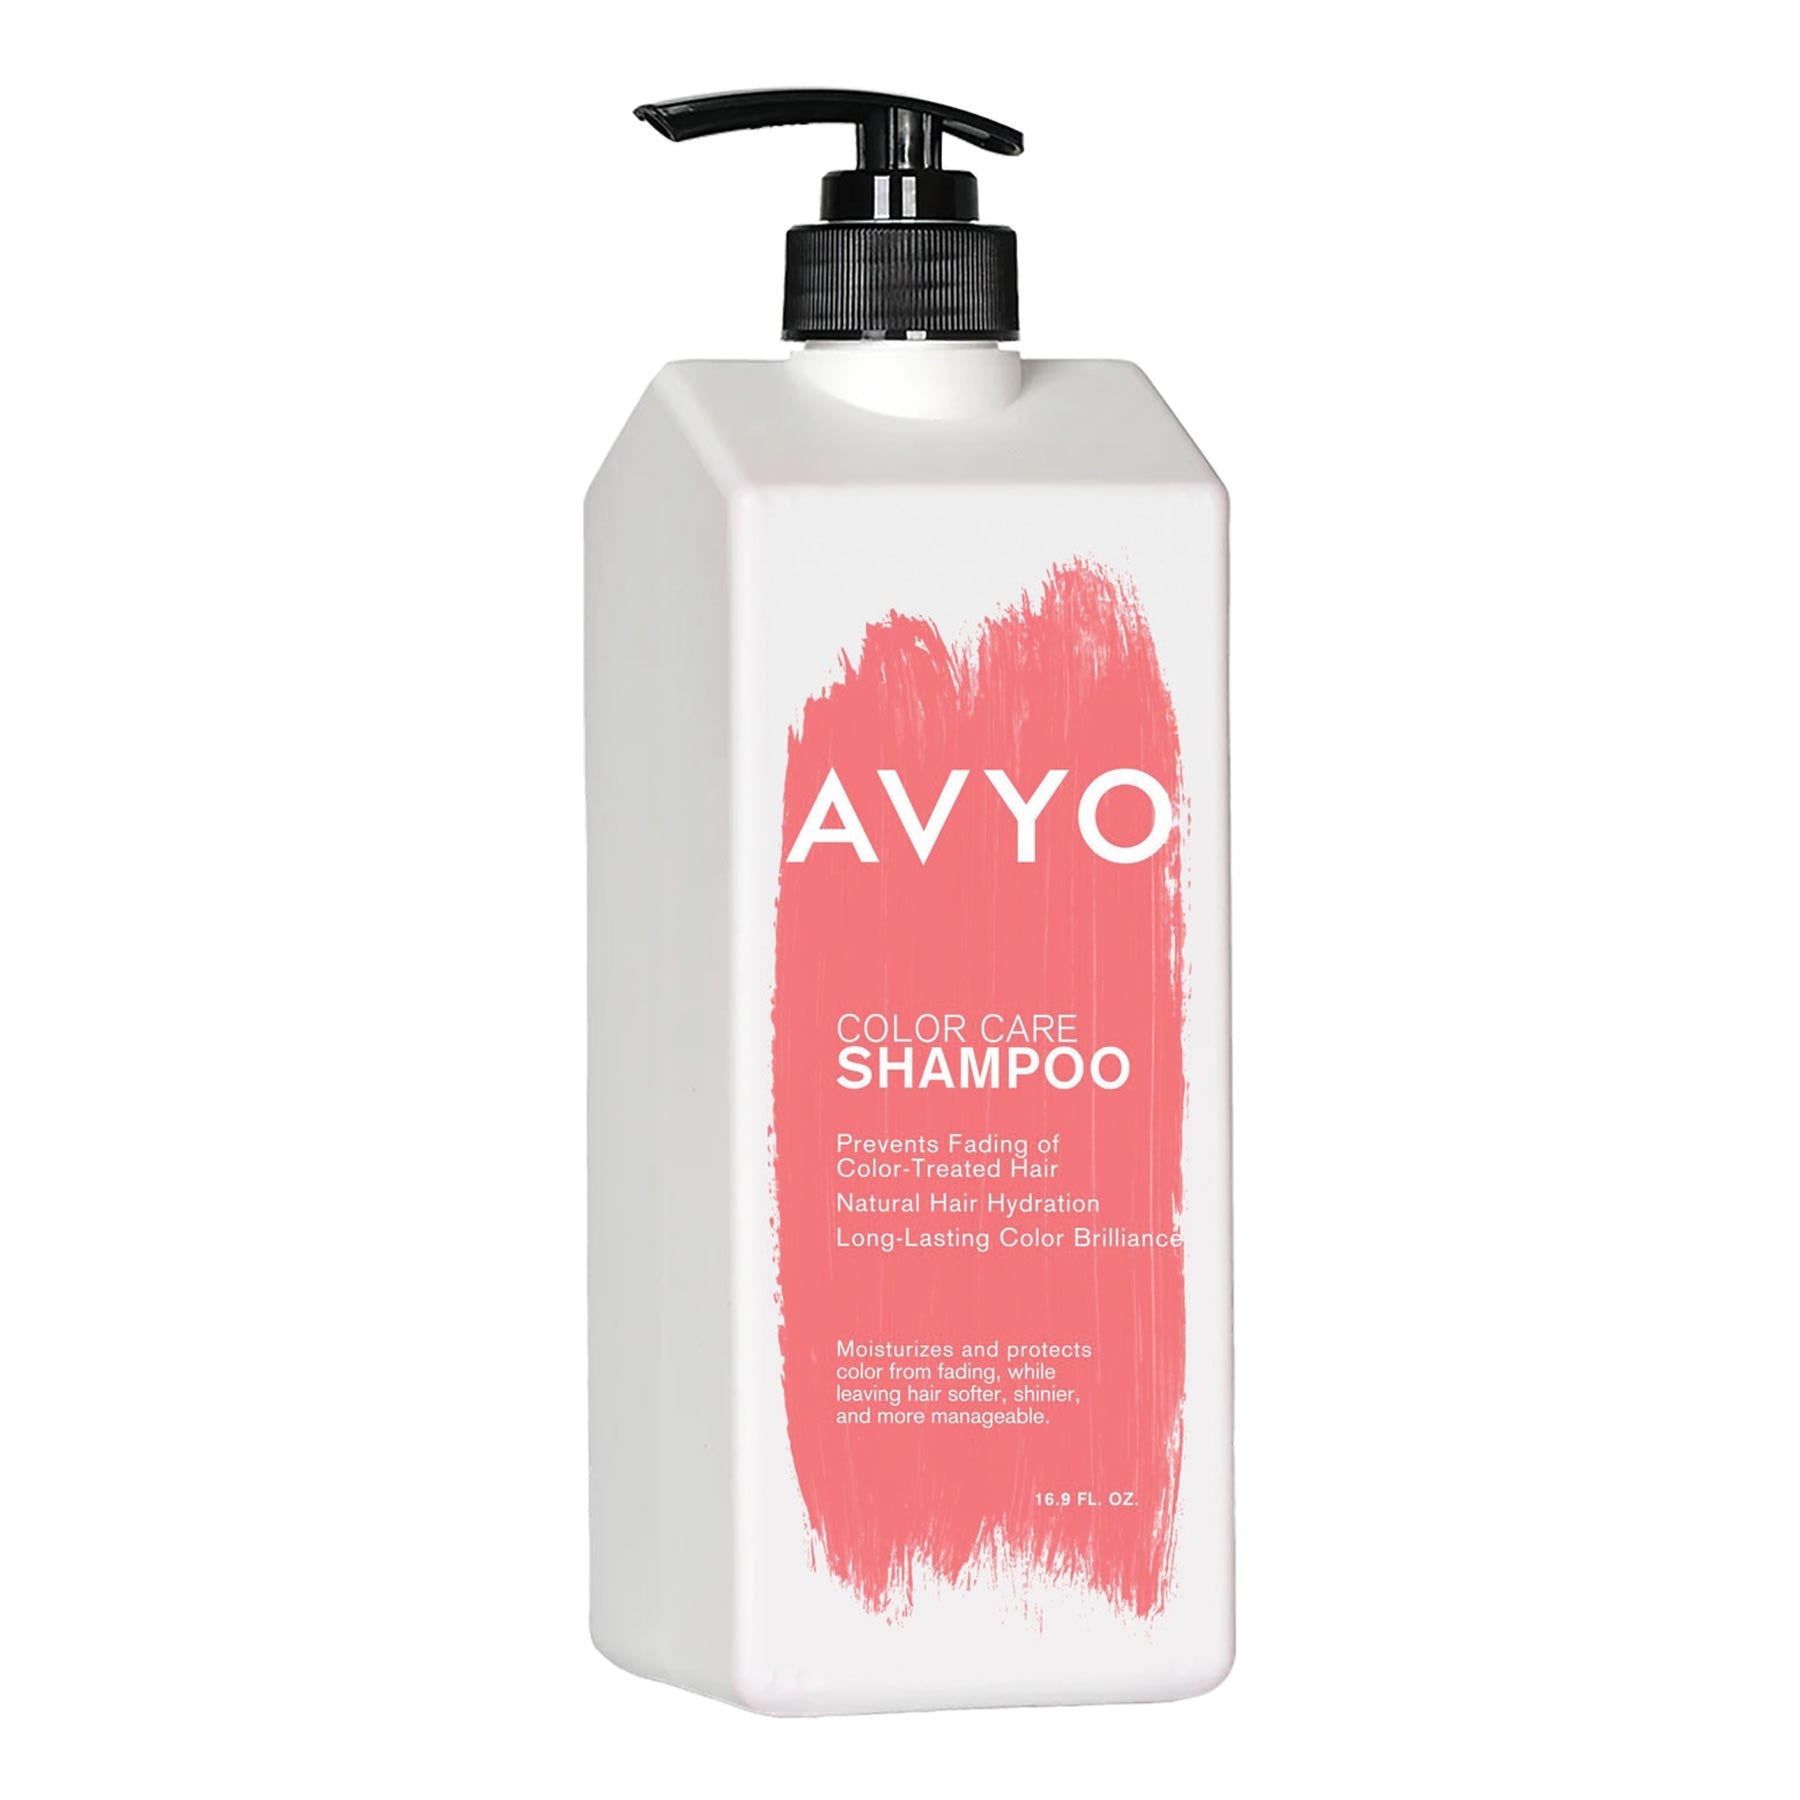 A white pump dispenser bottle of AVYO Color Care Shampoo with a bold red brushstroke design in the background. The label features the brand's name and product title, highlighting its benefits such as preventing the fading of color-treated hair, providing natural hair hydration, and promoting long-lasting color brilliance. The text on the label also mentions that the shampoo moisturizes and protects hair from fading, leaving it softer, shinier, and more manageable. The container size is 16.9 fluid ounces.